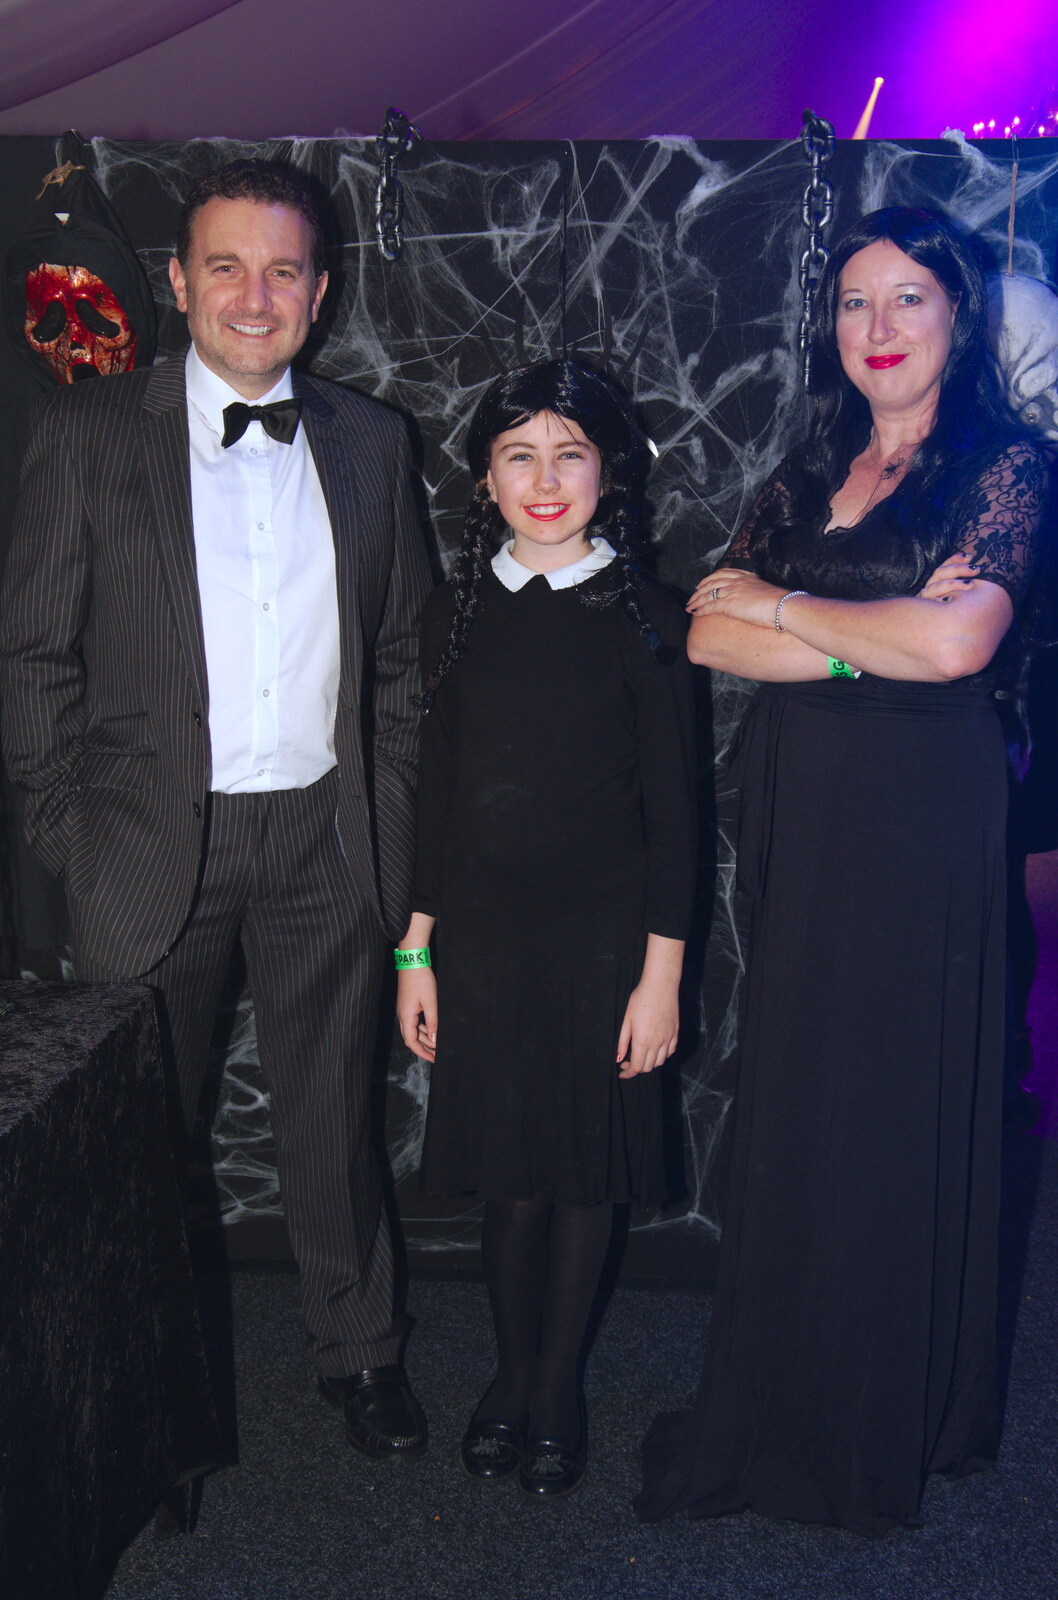 The Addams family from Day of the Dead Party at the Oaksmere, Brome, Suffolk - 2nd November 2019